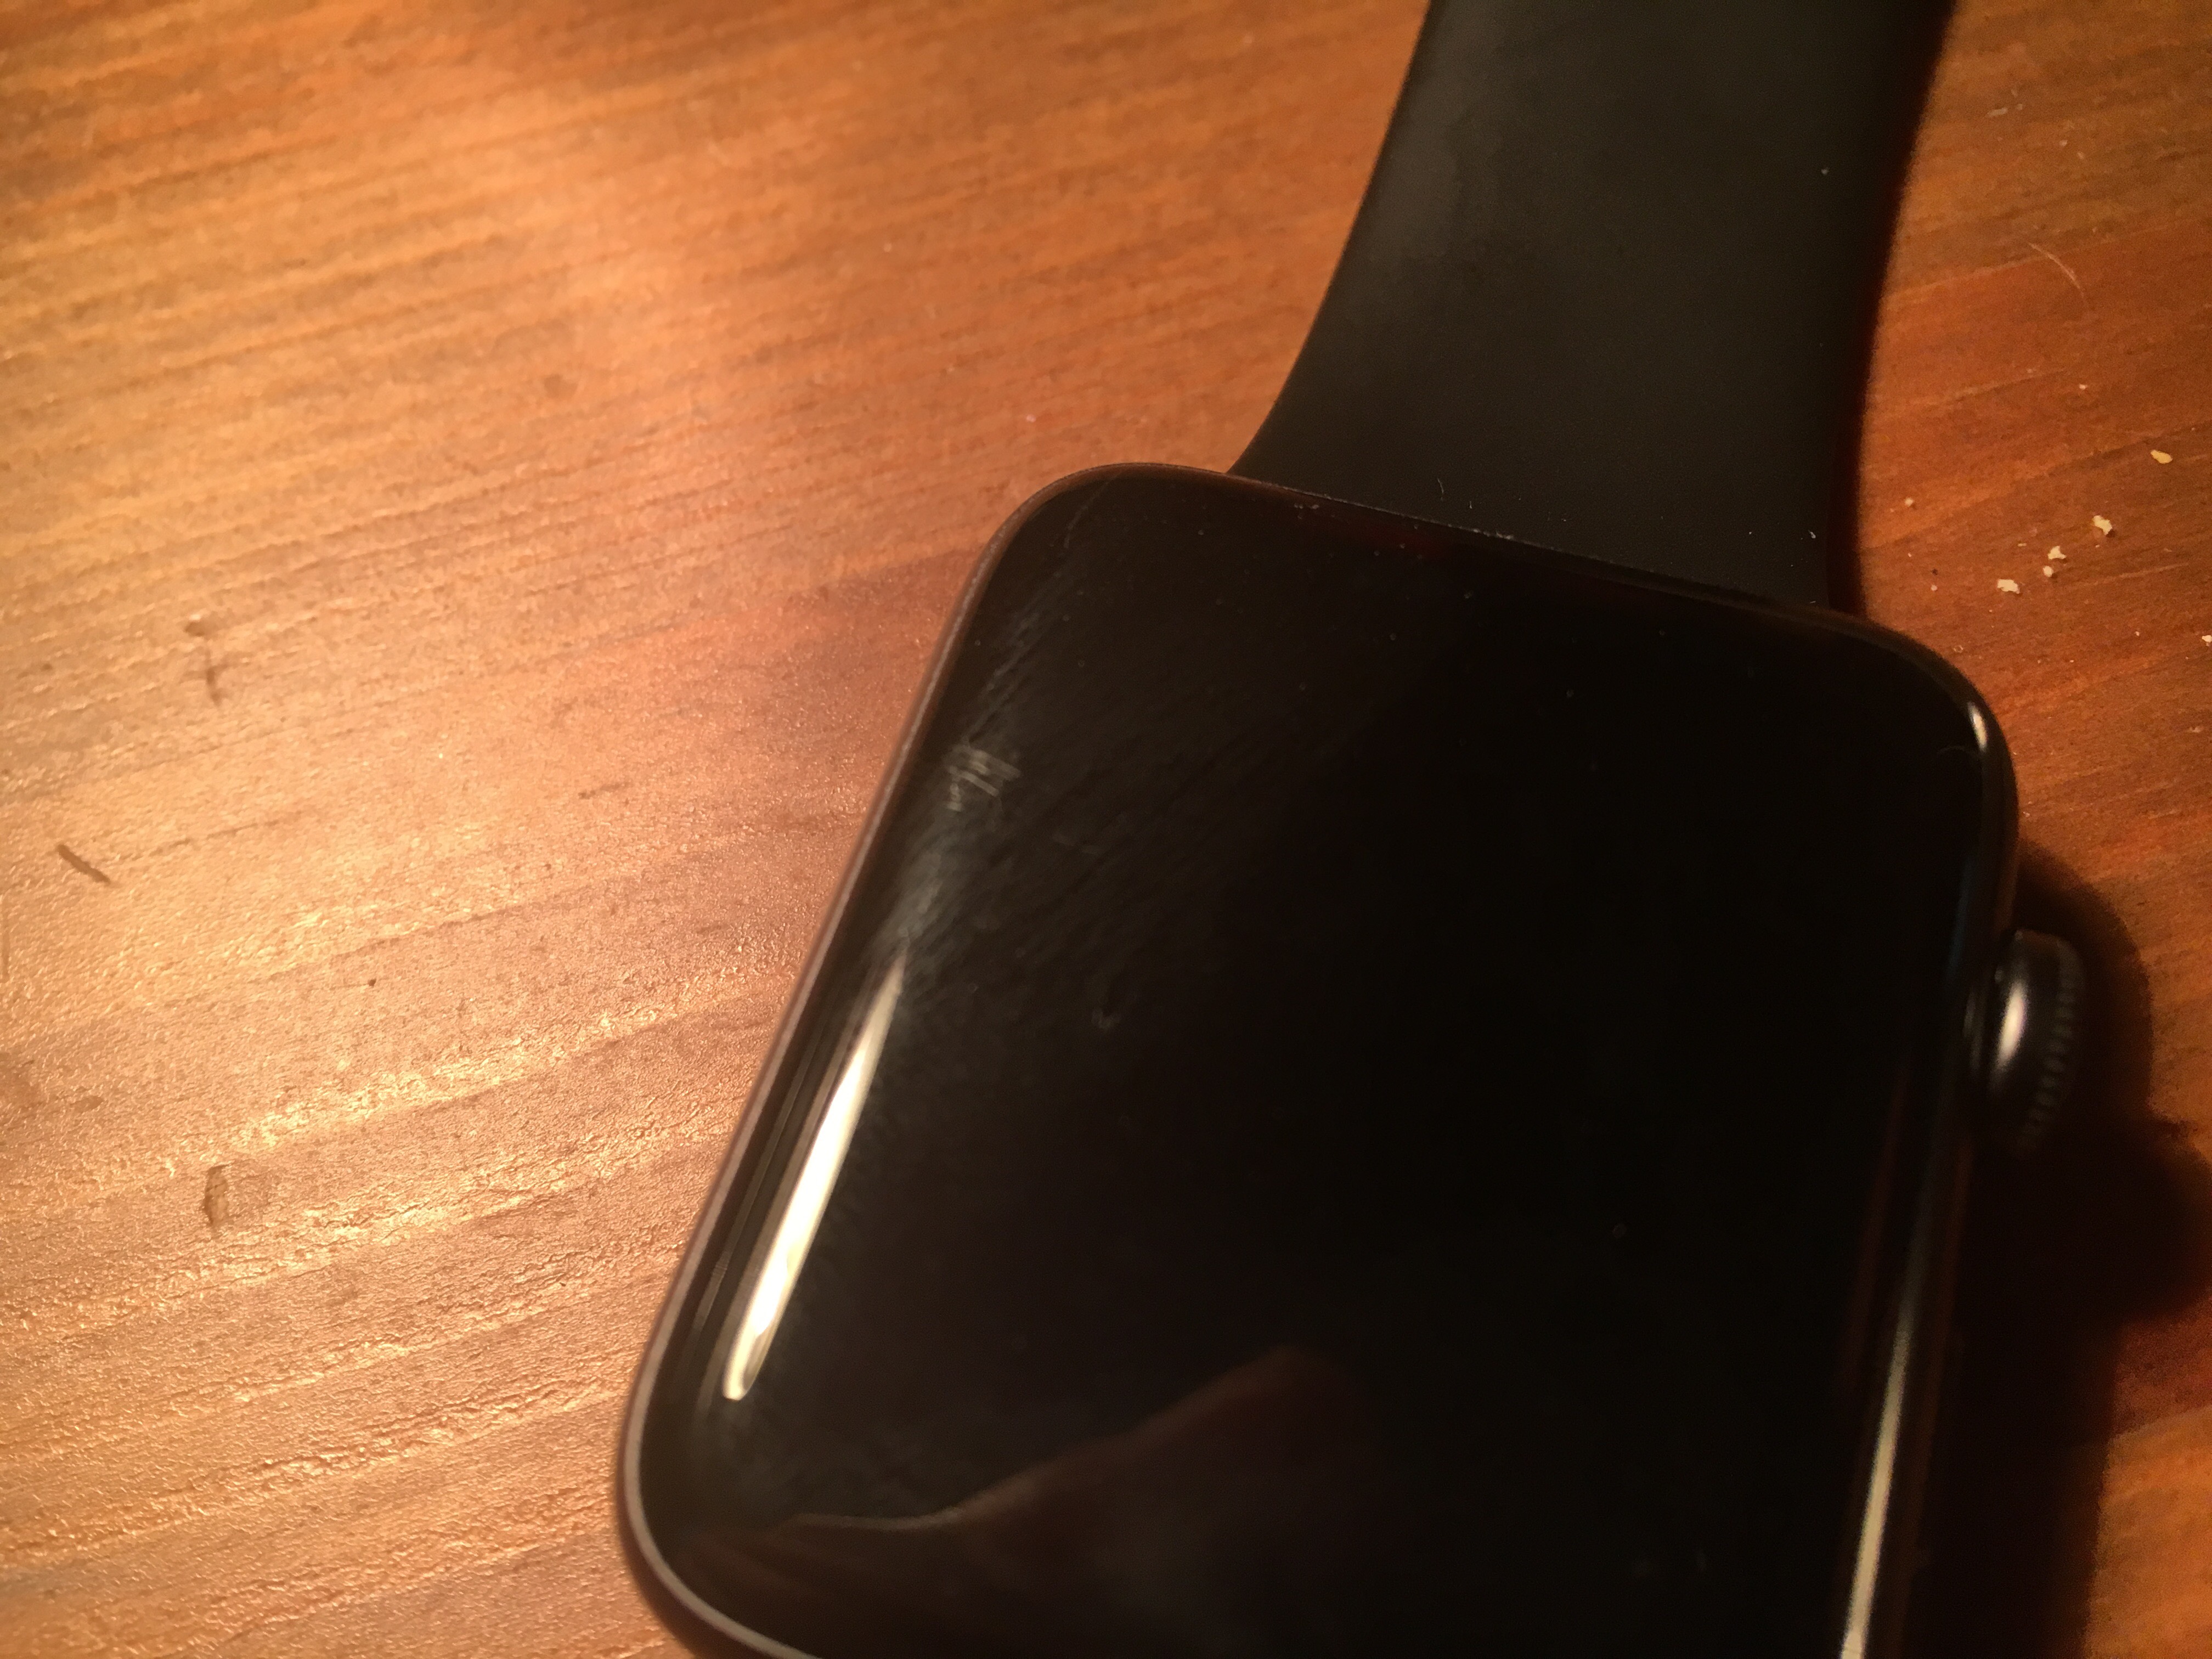 Any way to fix this little scratch in the screen? : r/AppleWatch